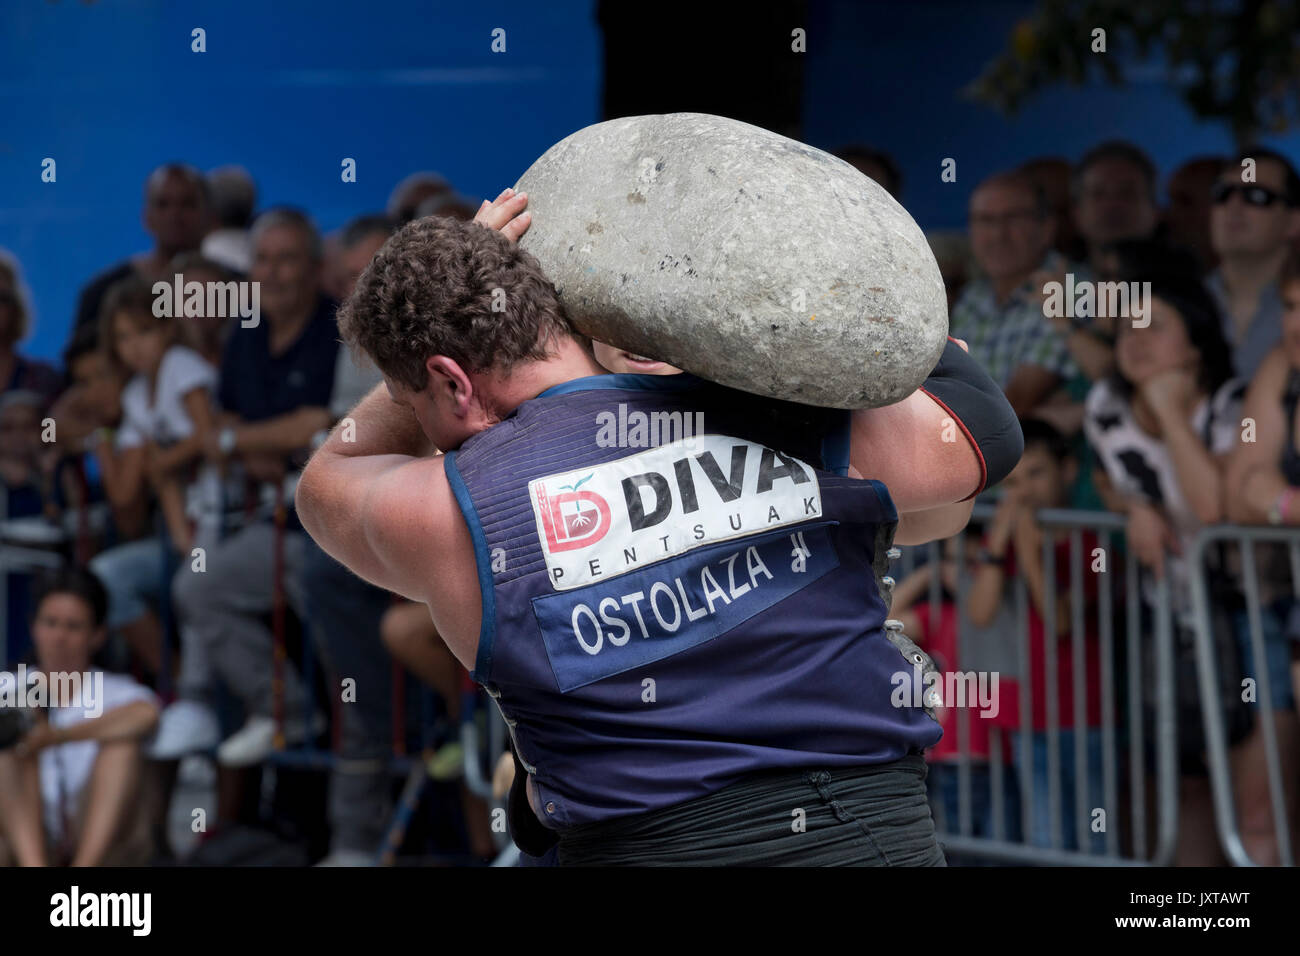 Basque stone lifter (harrijasotzaile) lifting a huge granite stone in a competition. Stock Photo